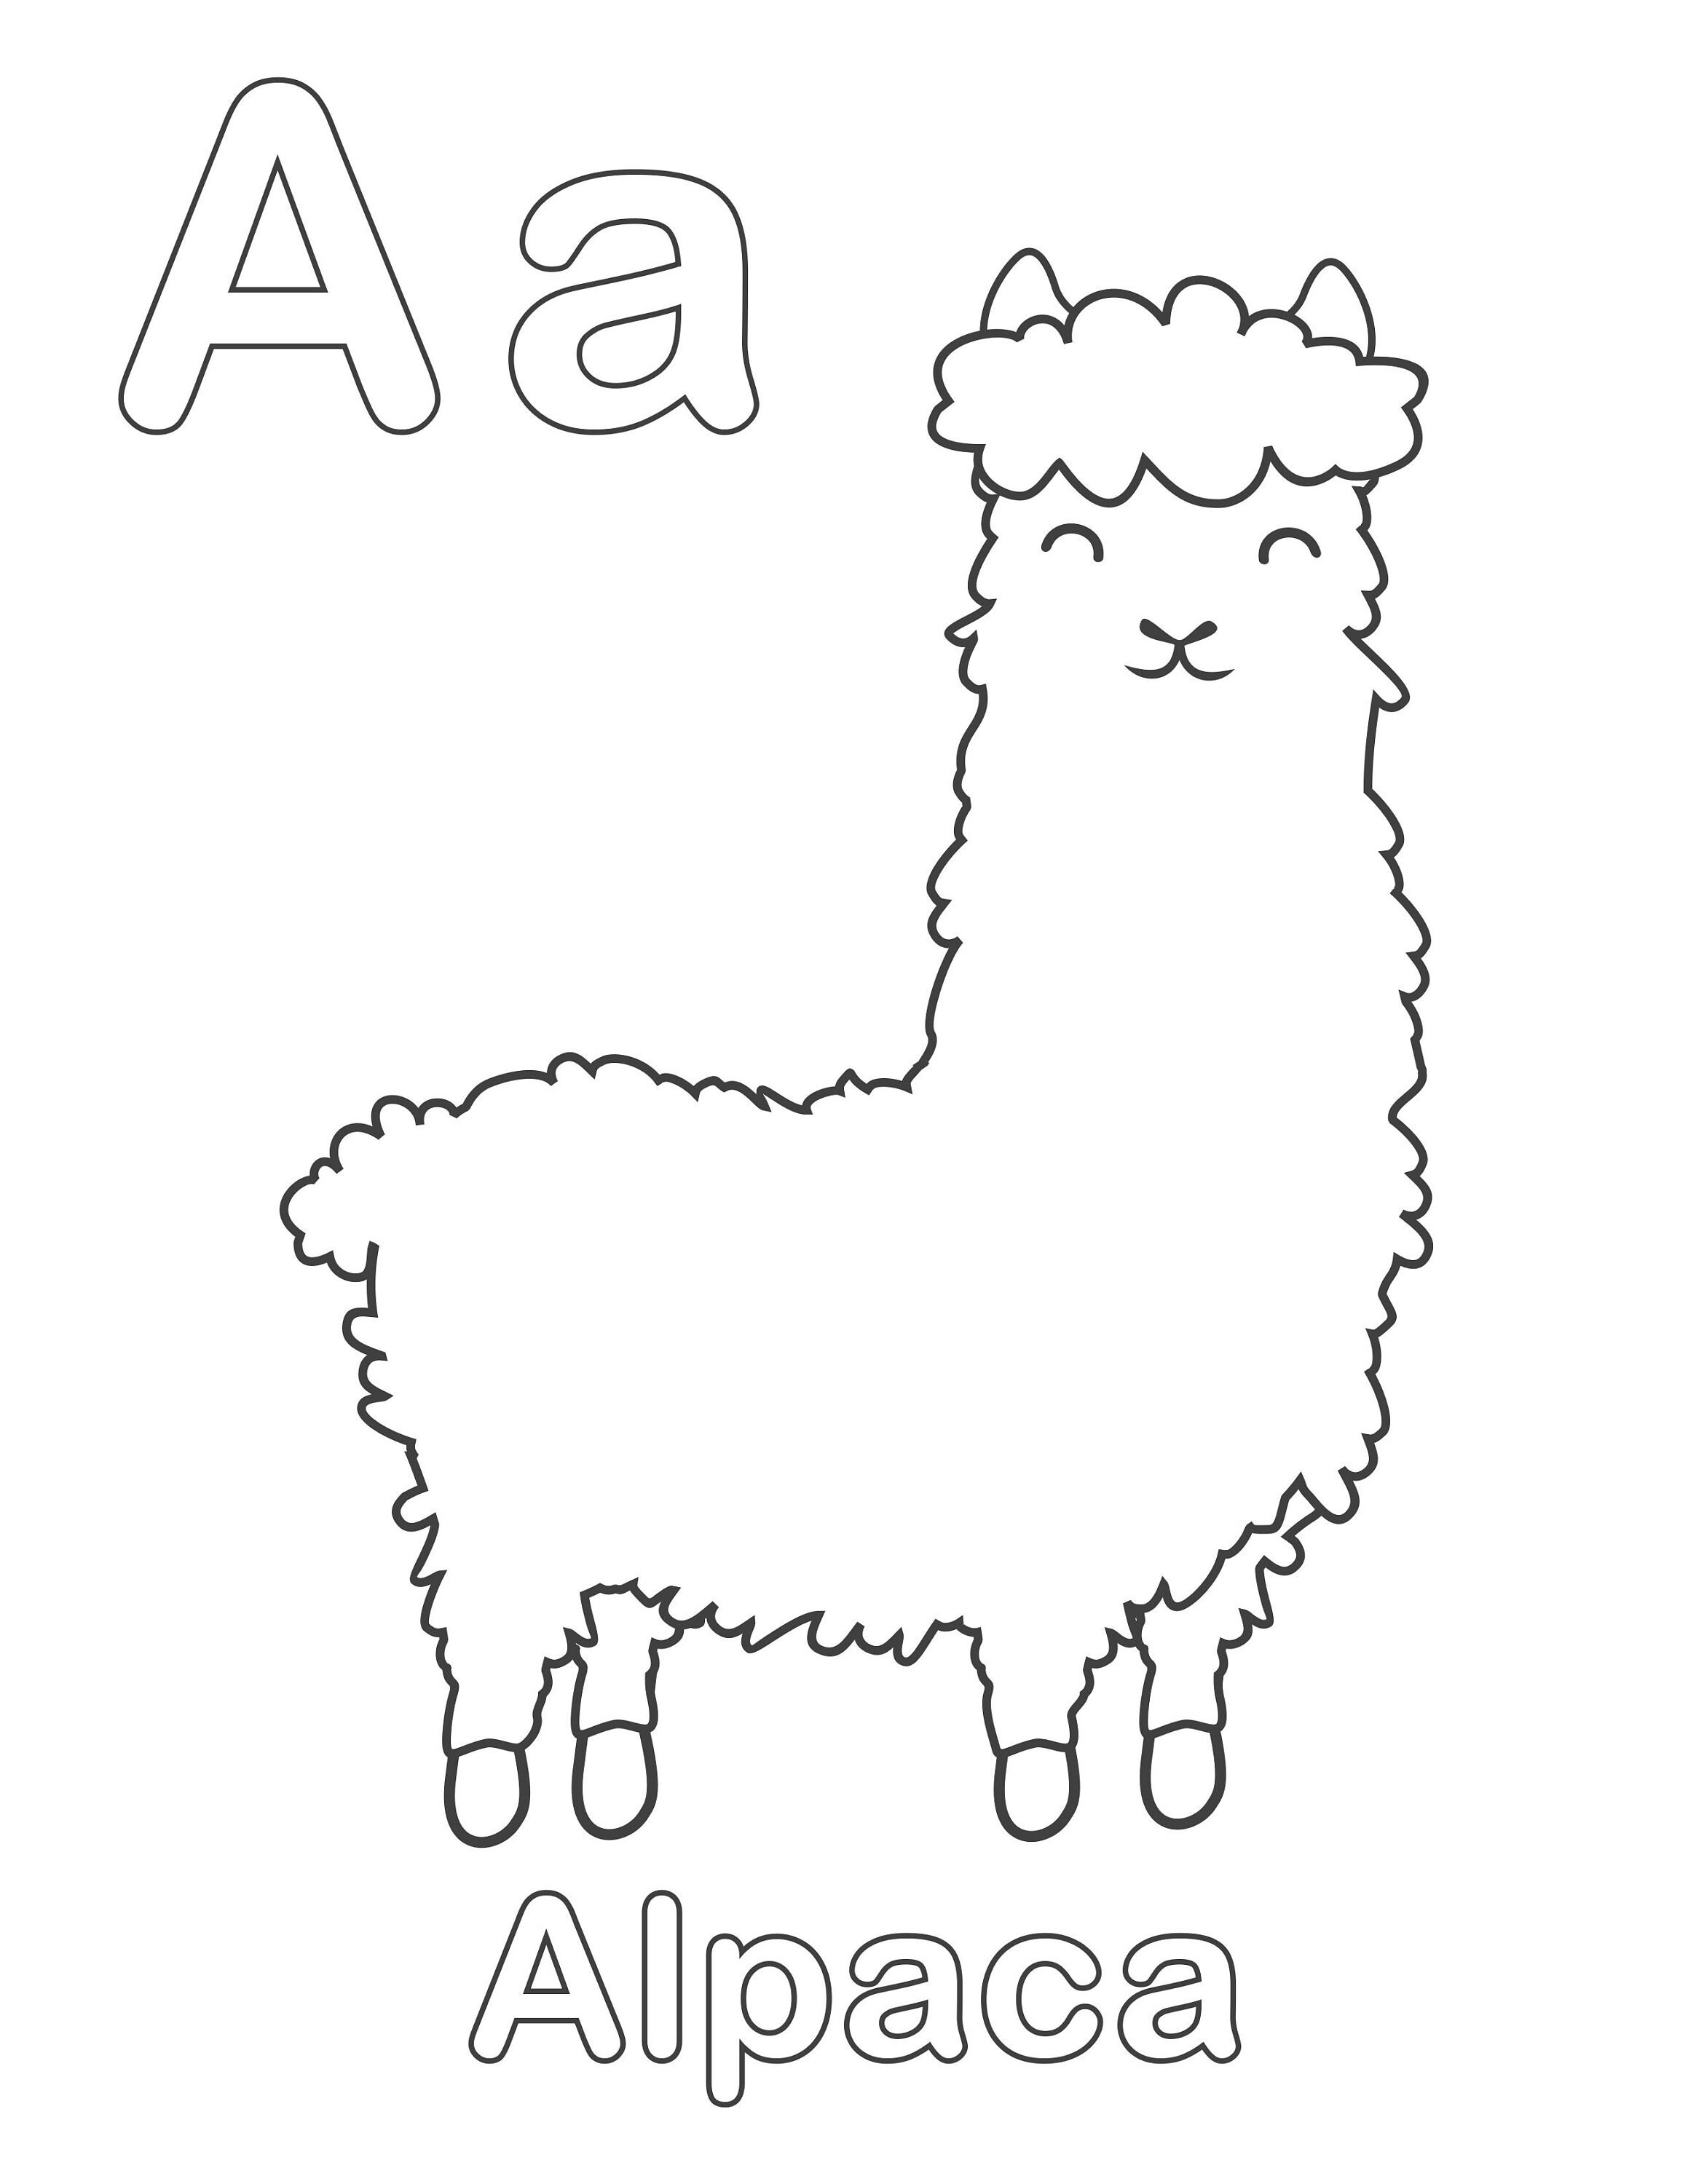 Alphabet Coloring Book for Kids of All Ages. - Etsy